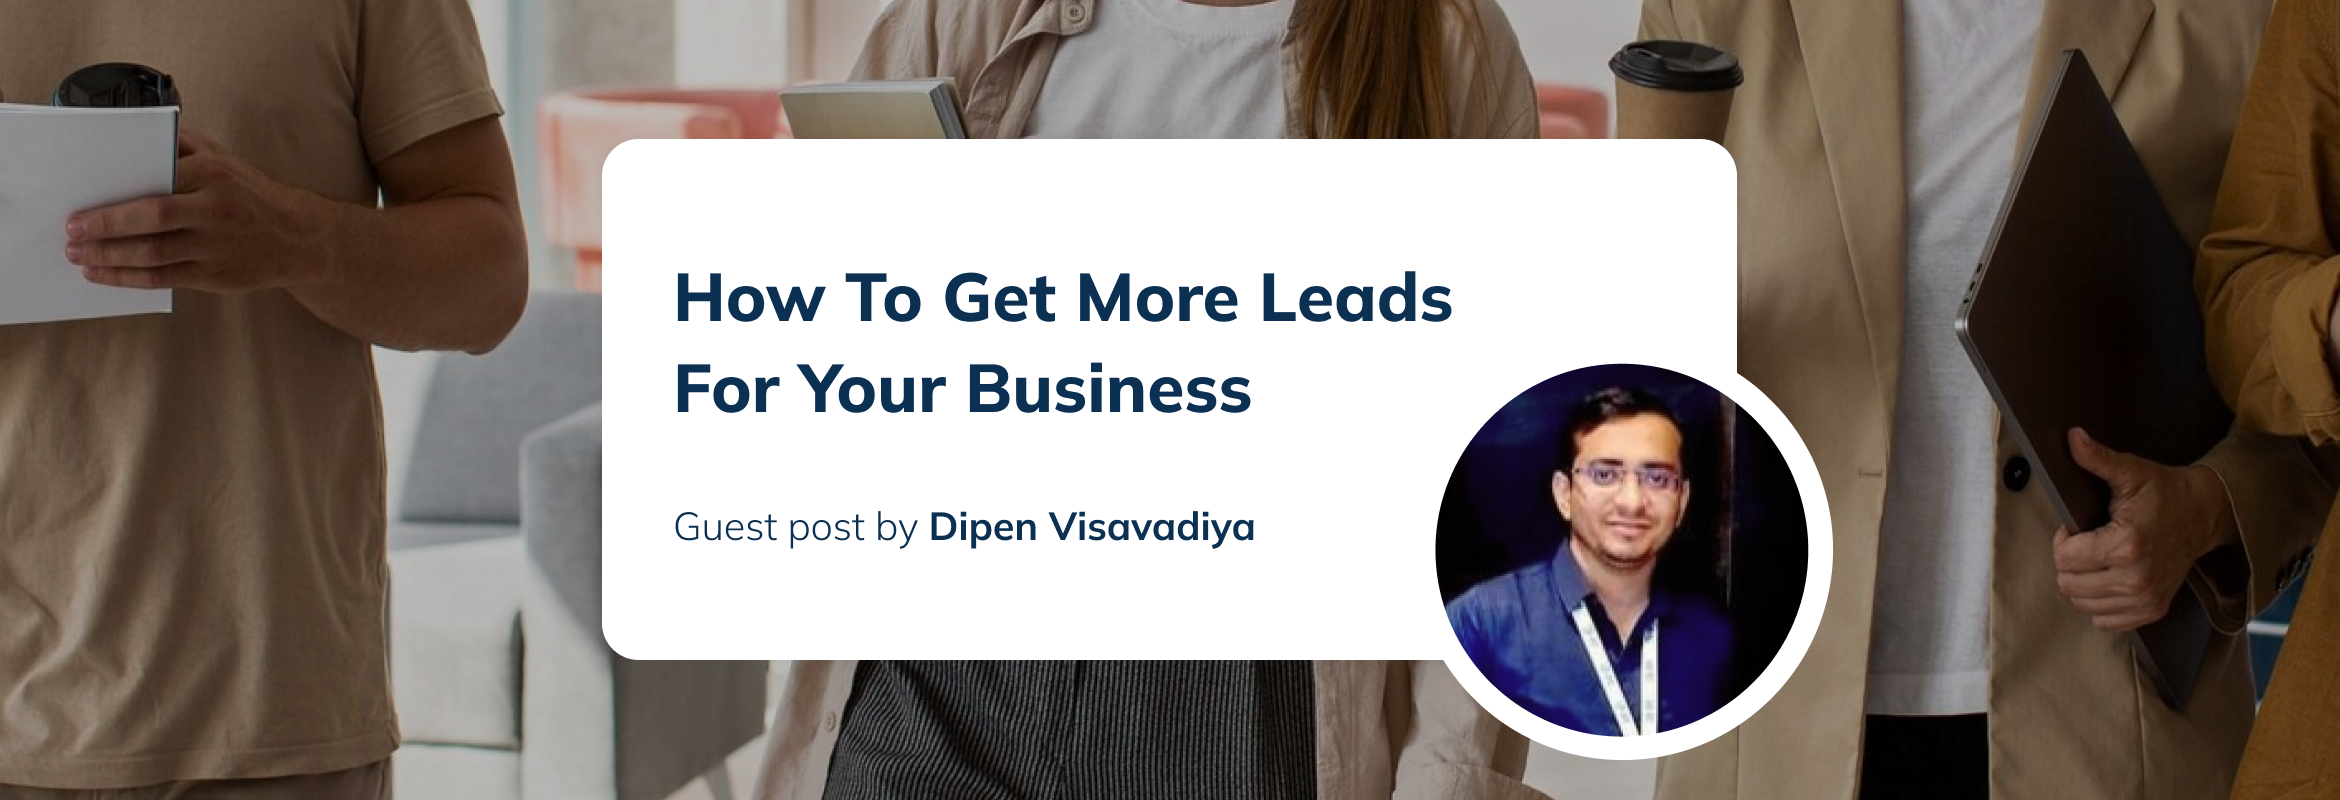 How to get more leads for your business